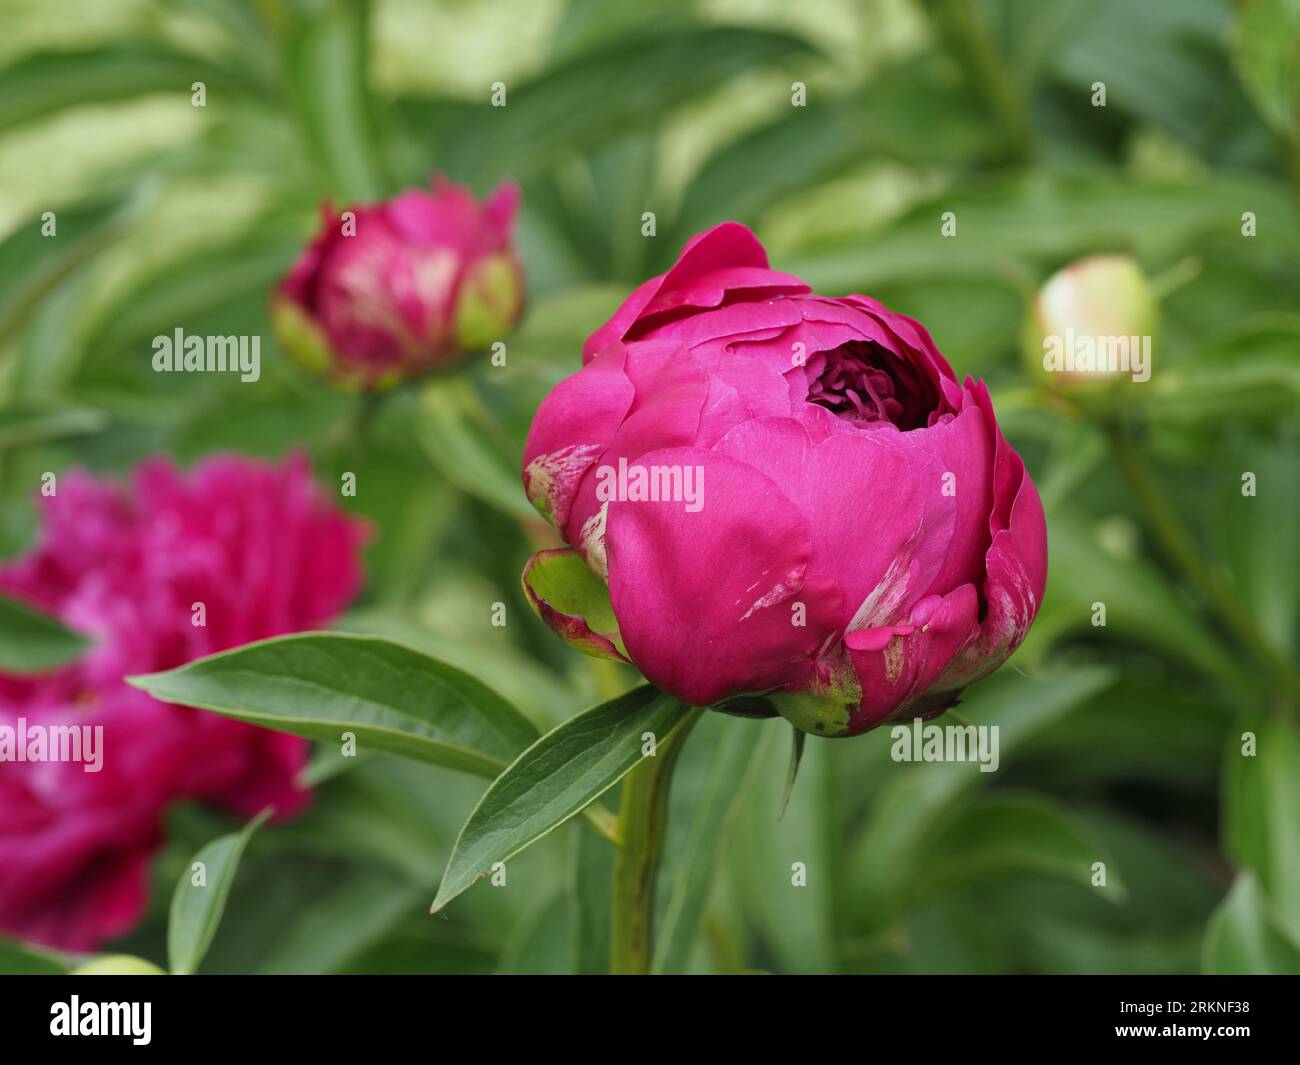 Magenta peony flower bud blooming in spring. Scientific name: Paeonia. Family: Paeoniaceae. Order: Saxifragales. Kingdom: Plantae. Stock Photo